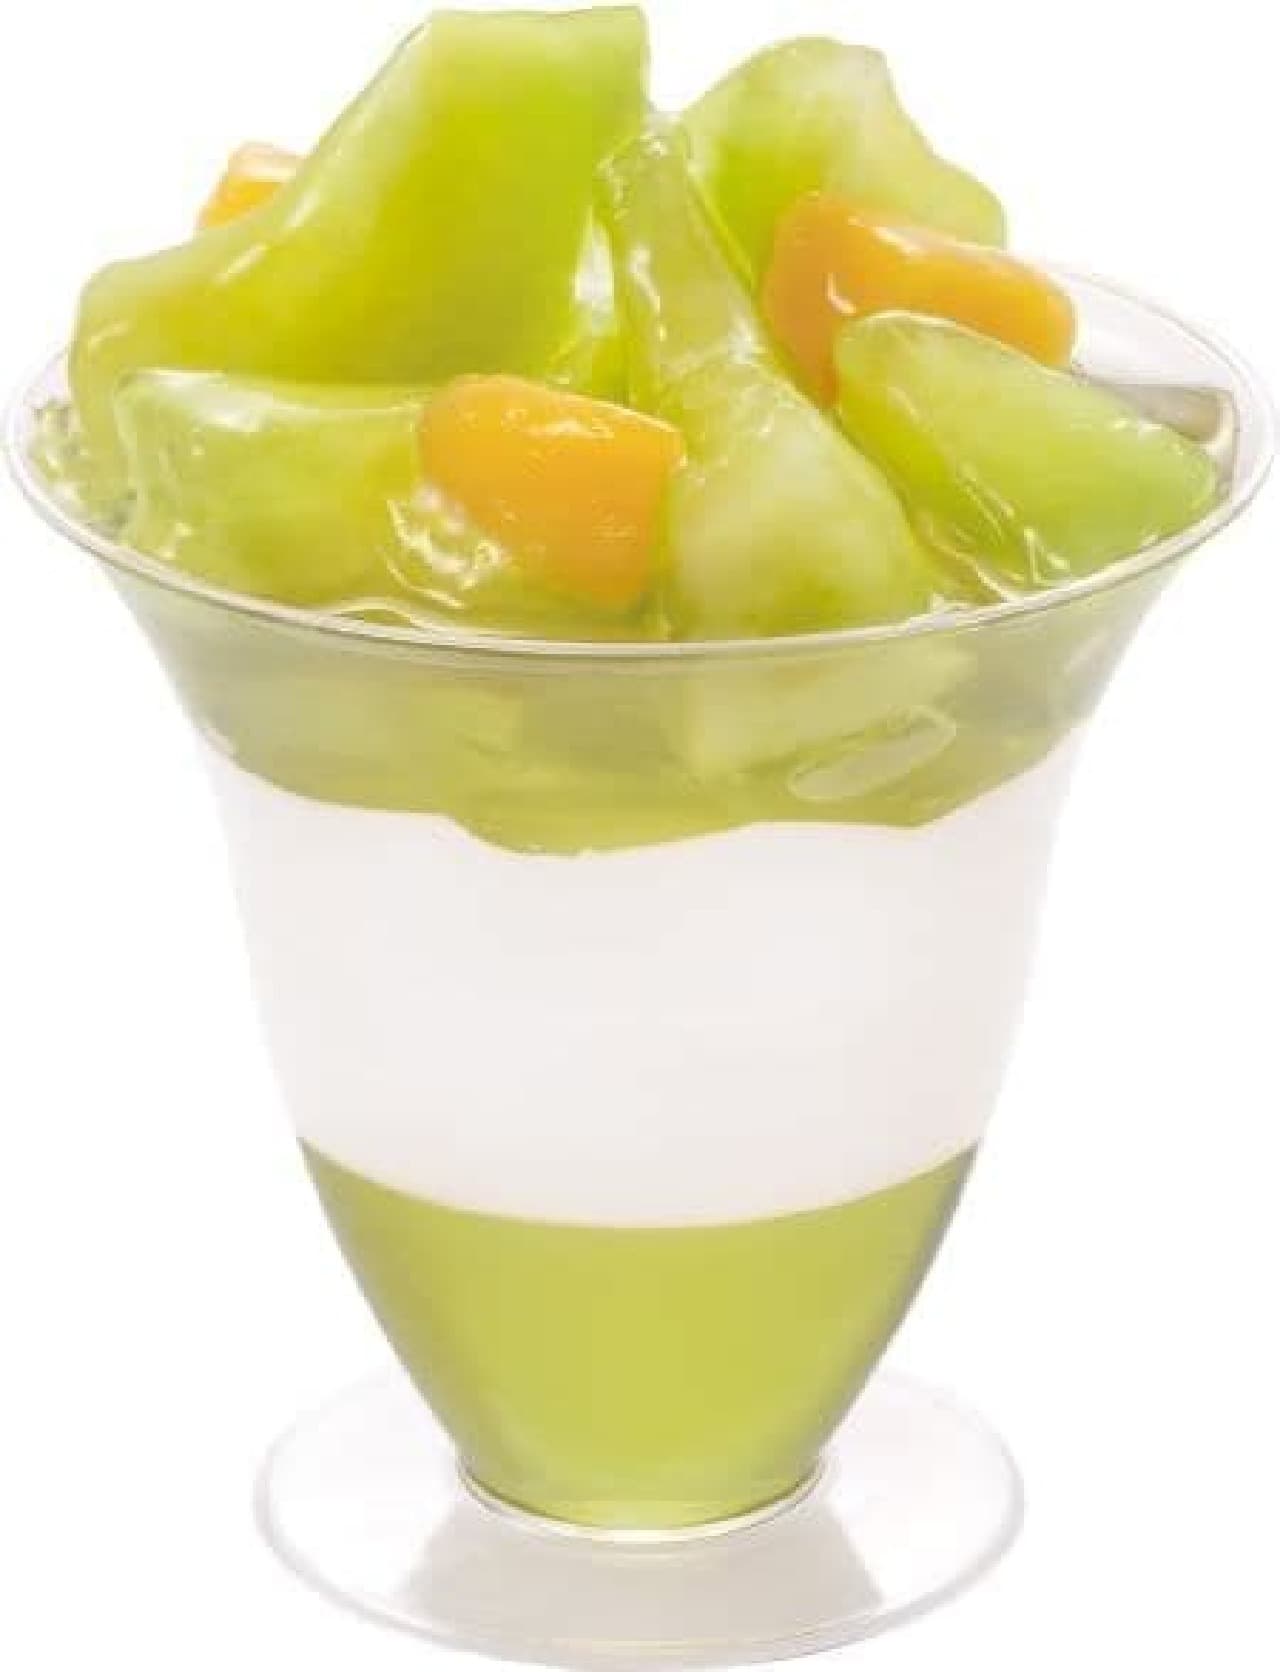 "Melon Coco" is a parfait with two layers of coconut blanche and melon jelly.